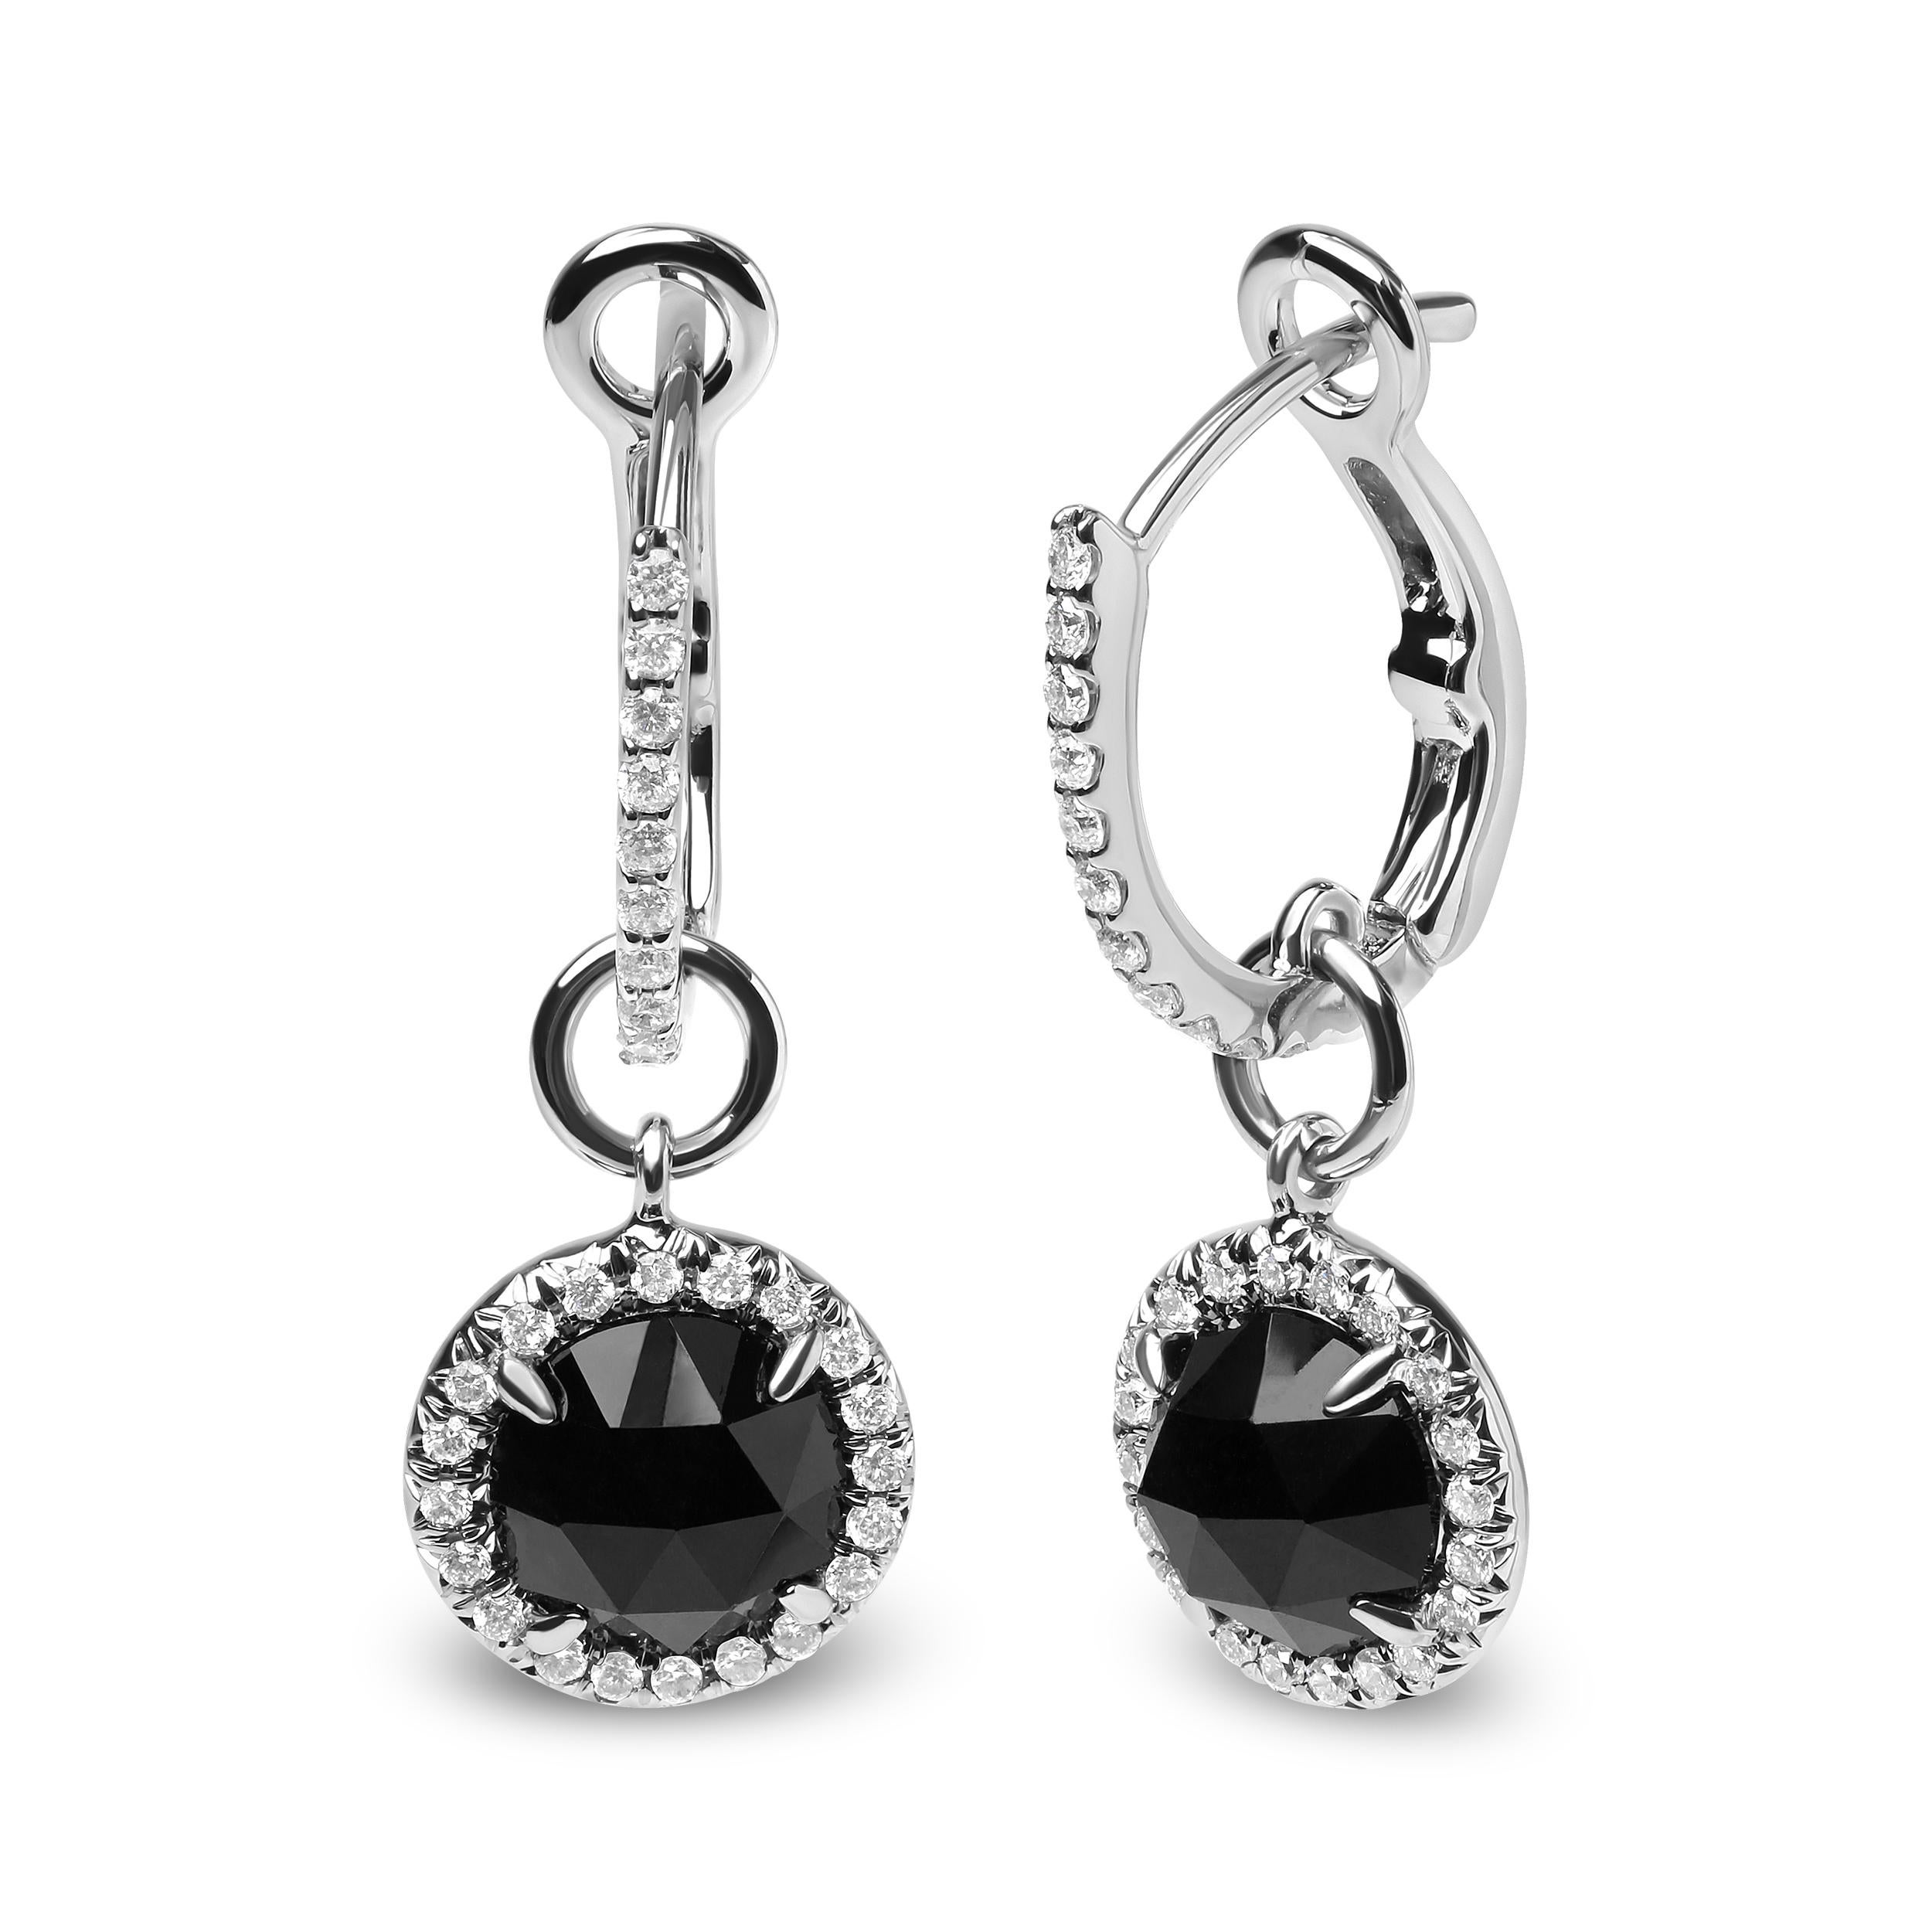 A tremendous level of sparkle emanates from these 18k white gold dangle hoop earrings. Set with natural 7mm round heat-treated black onyx at the center of each earring, these prong set gemstones are complemented by the a glamorous halo of round